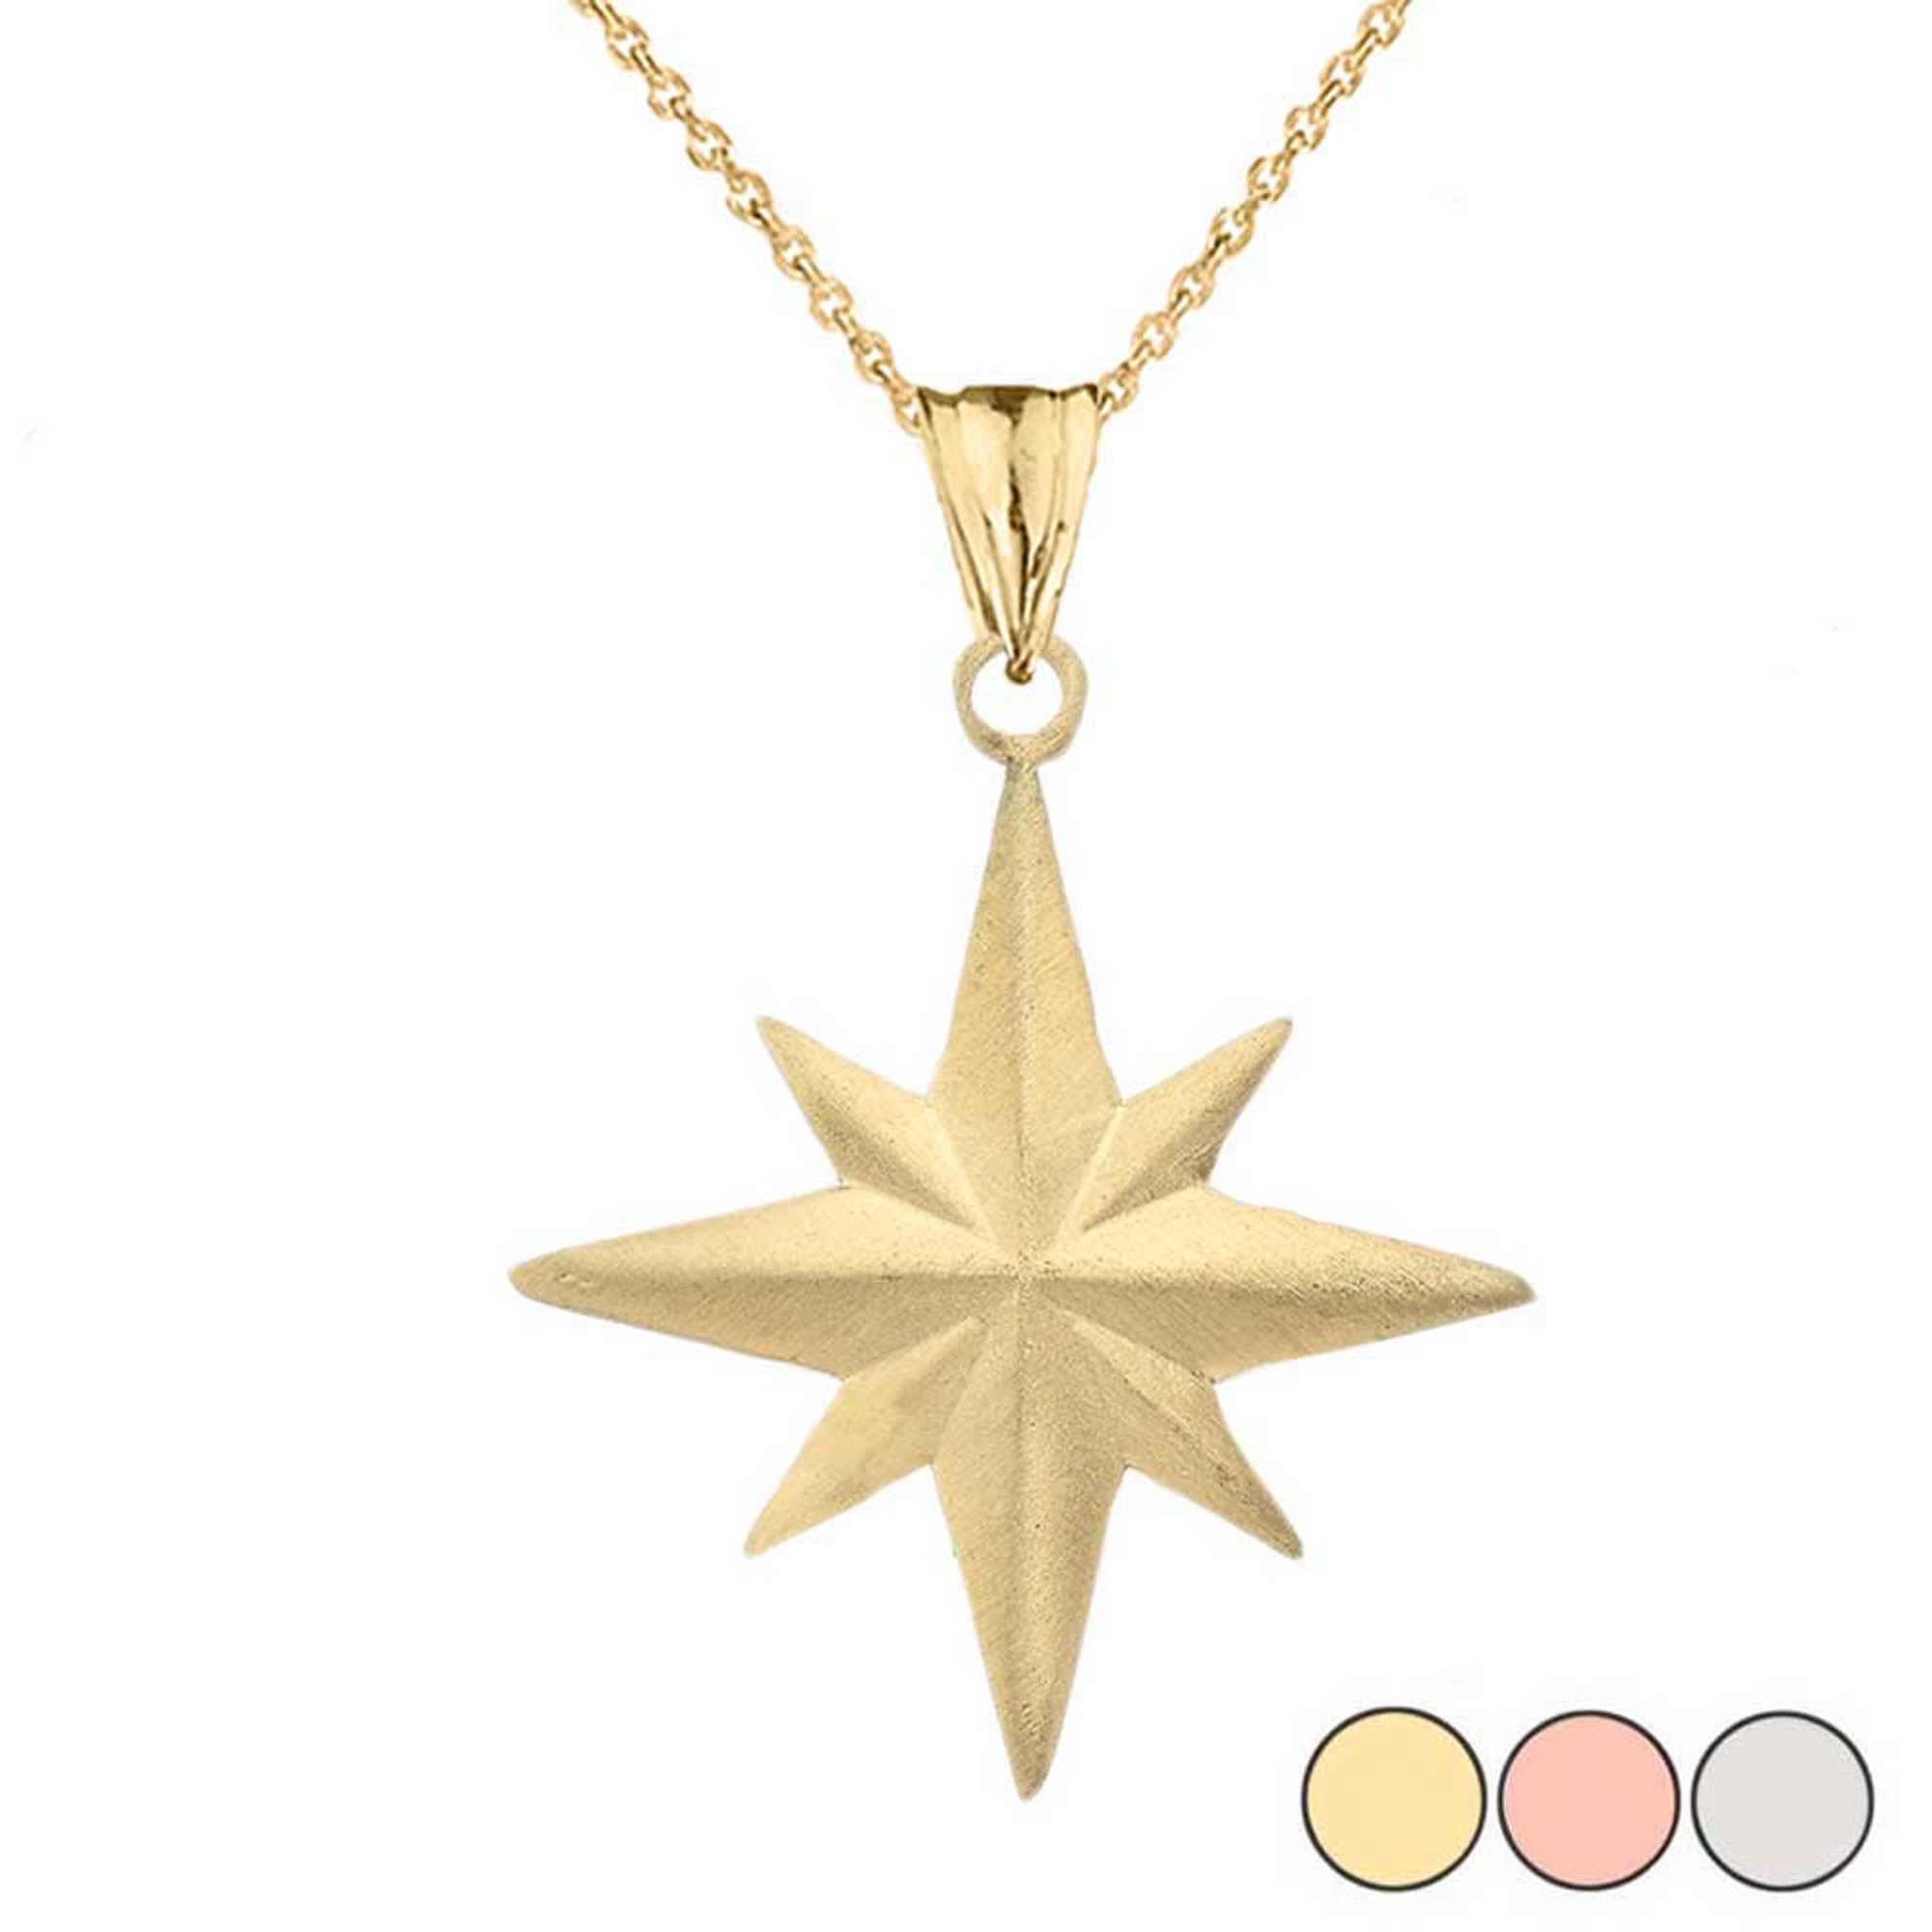 North Star Necklace – lovelorimichellejewelry